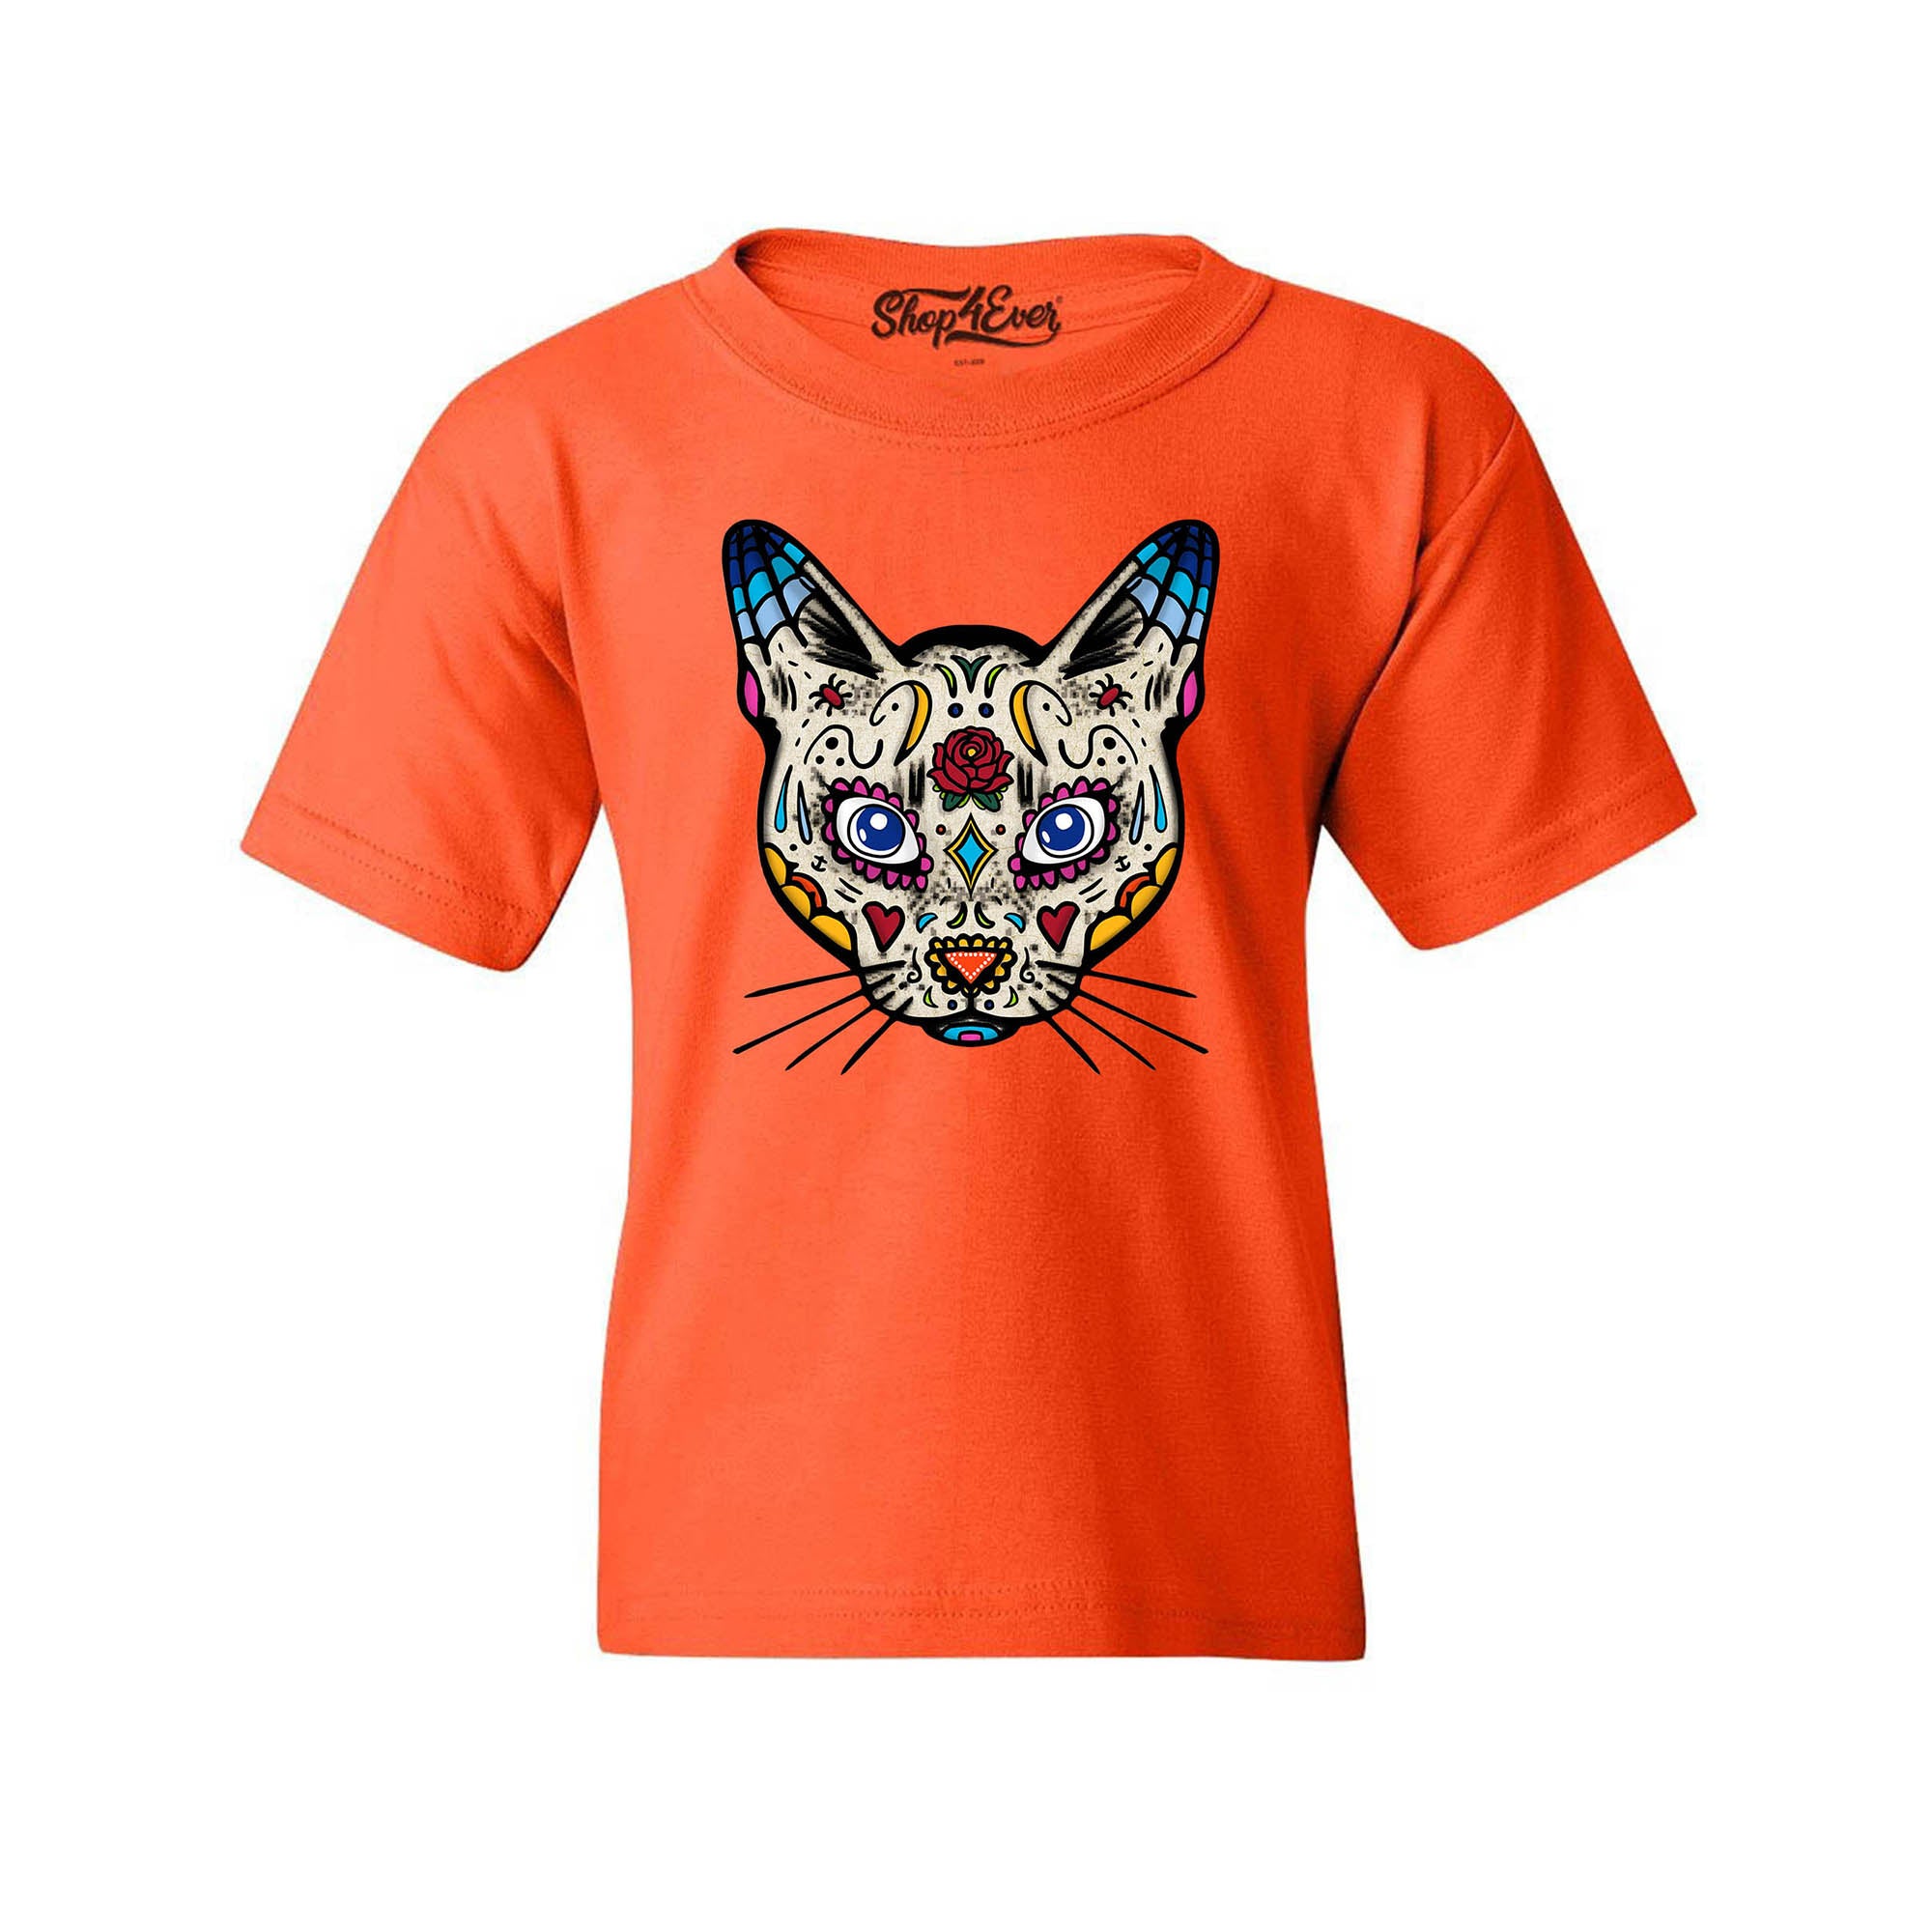 Day of The Dead Skull Child's Tee Sugar Cat Youth's T-Shirt